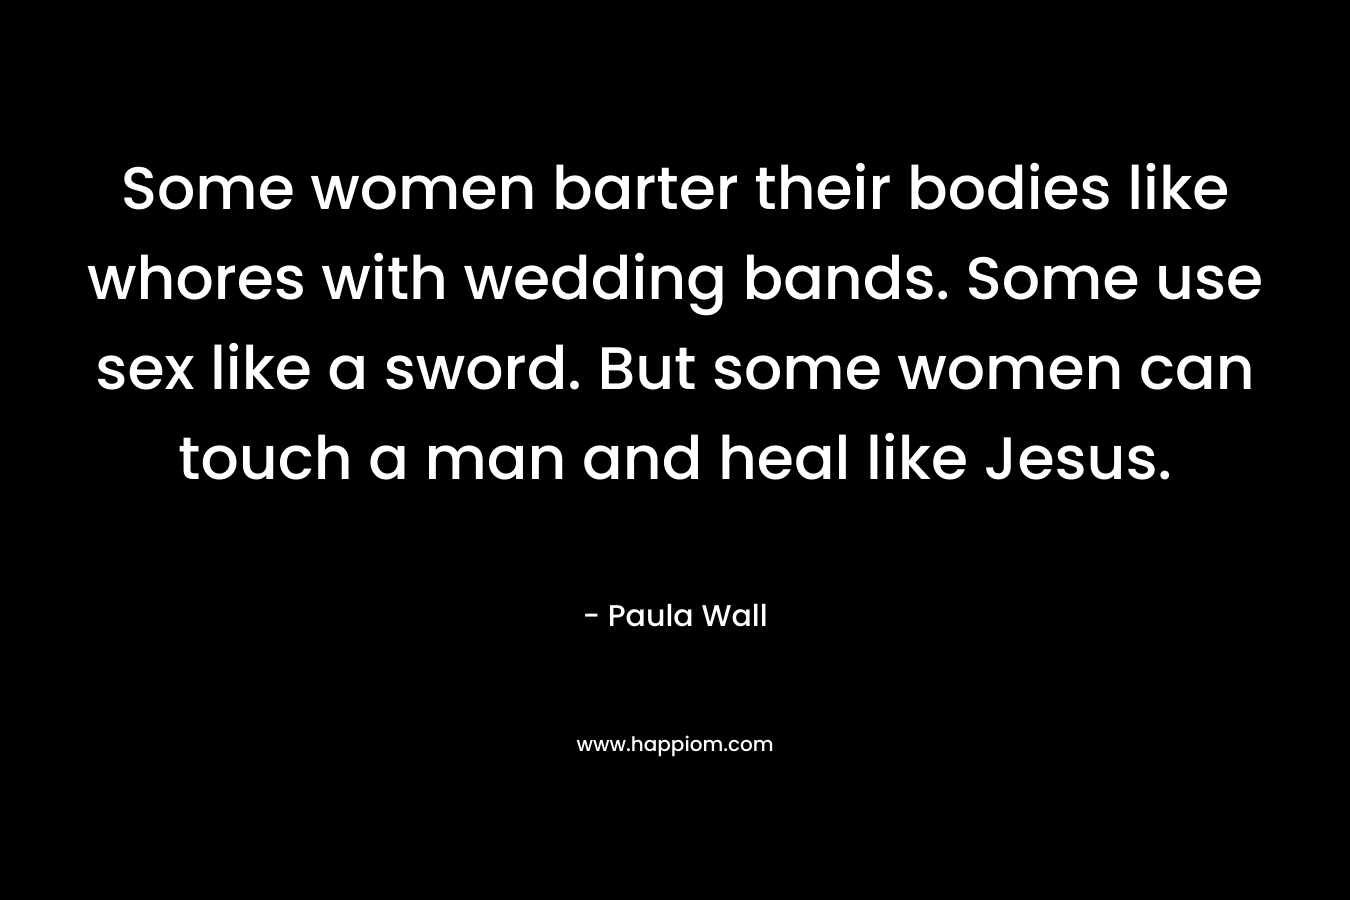 Some women barter their bodies like whores with wedding bands. Some use sex like a sword. But some women can touch a man and heal like Jesus. – Paula Wall